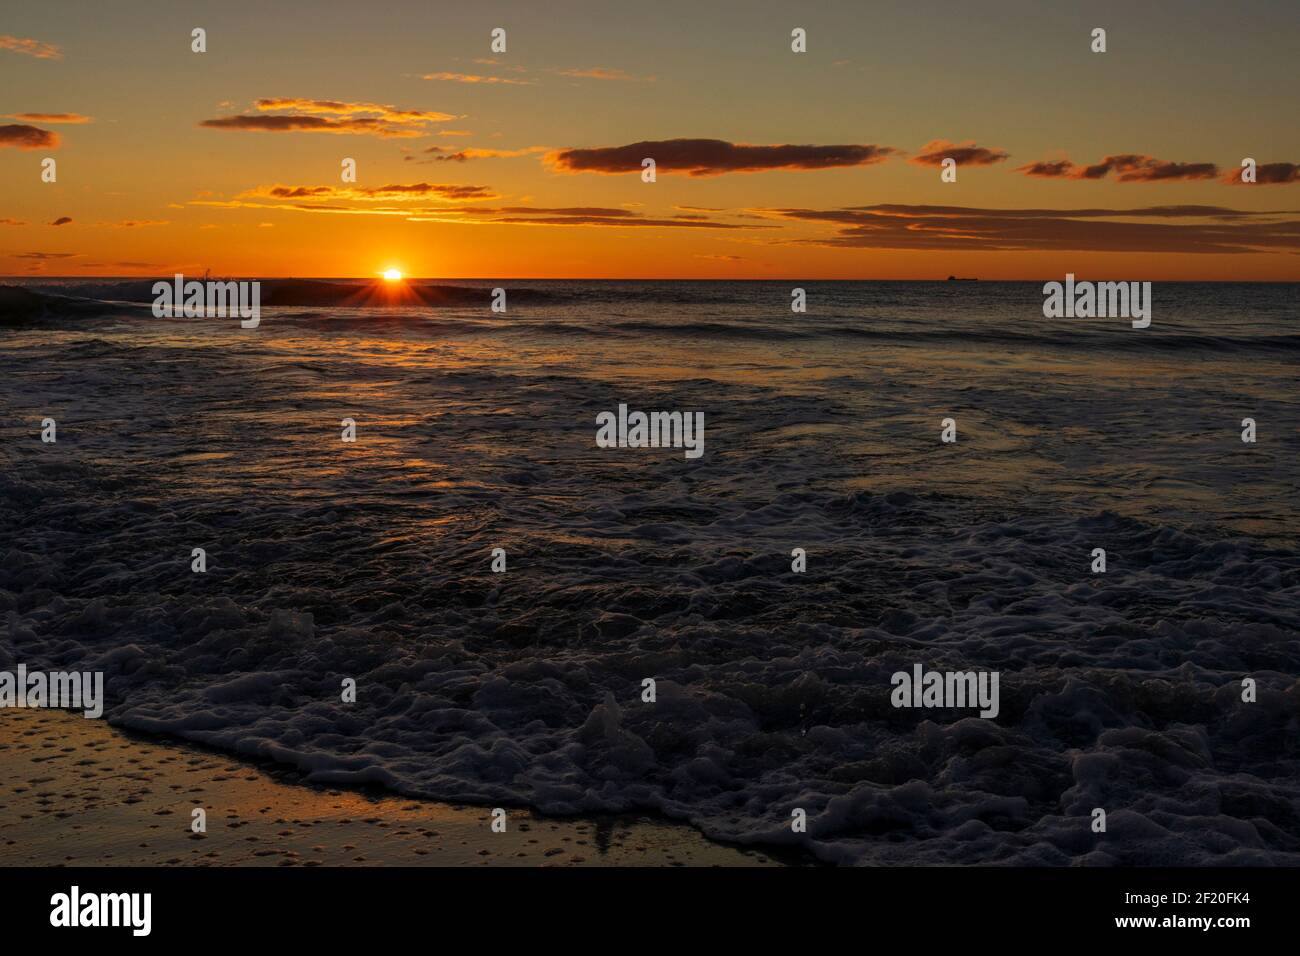 A beautiful sunrise from the shore of the beach, Spain Stock Photo